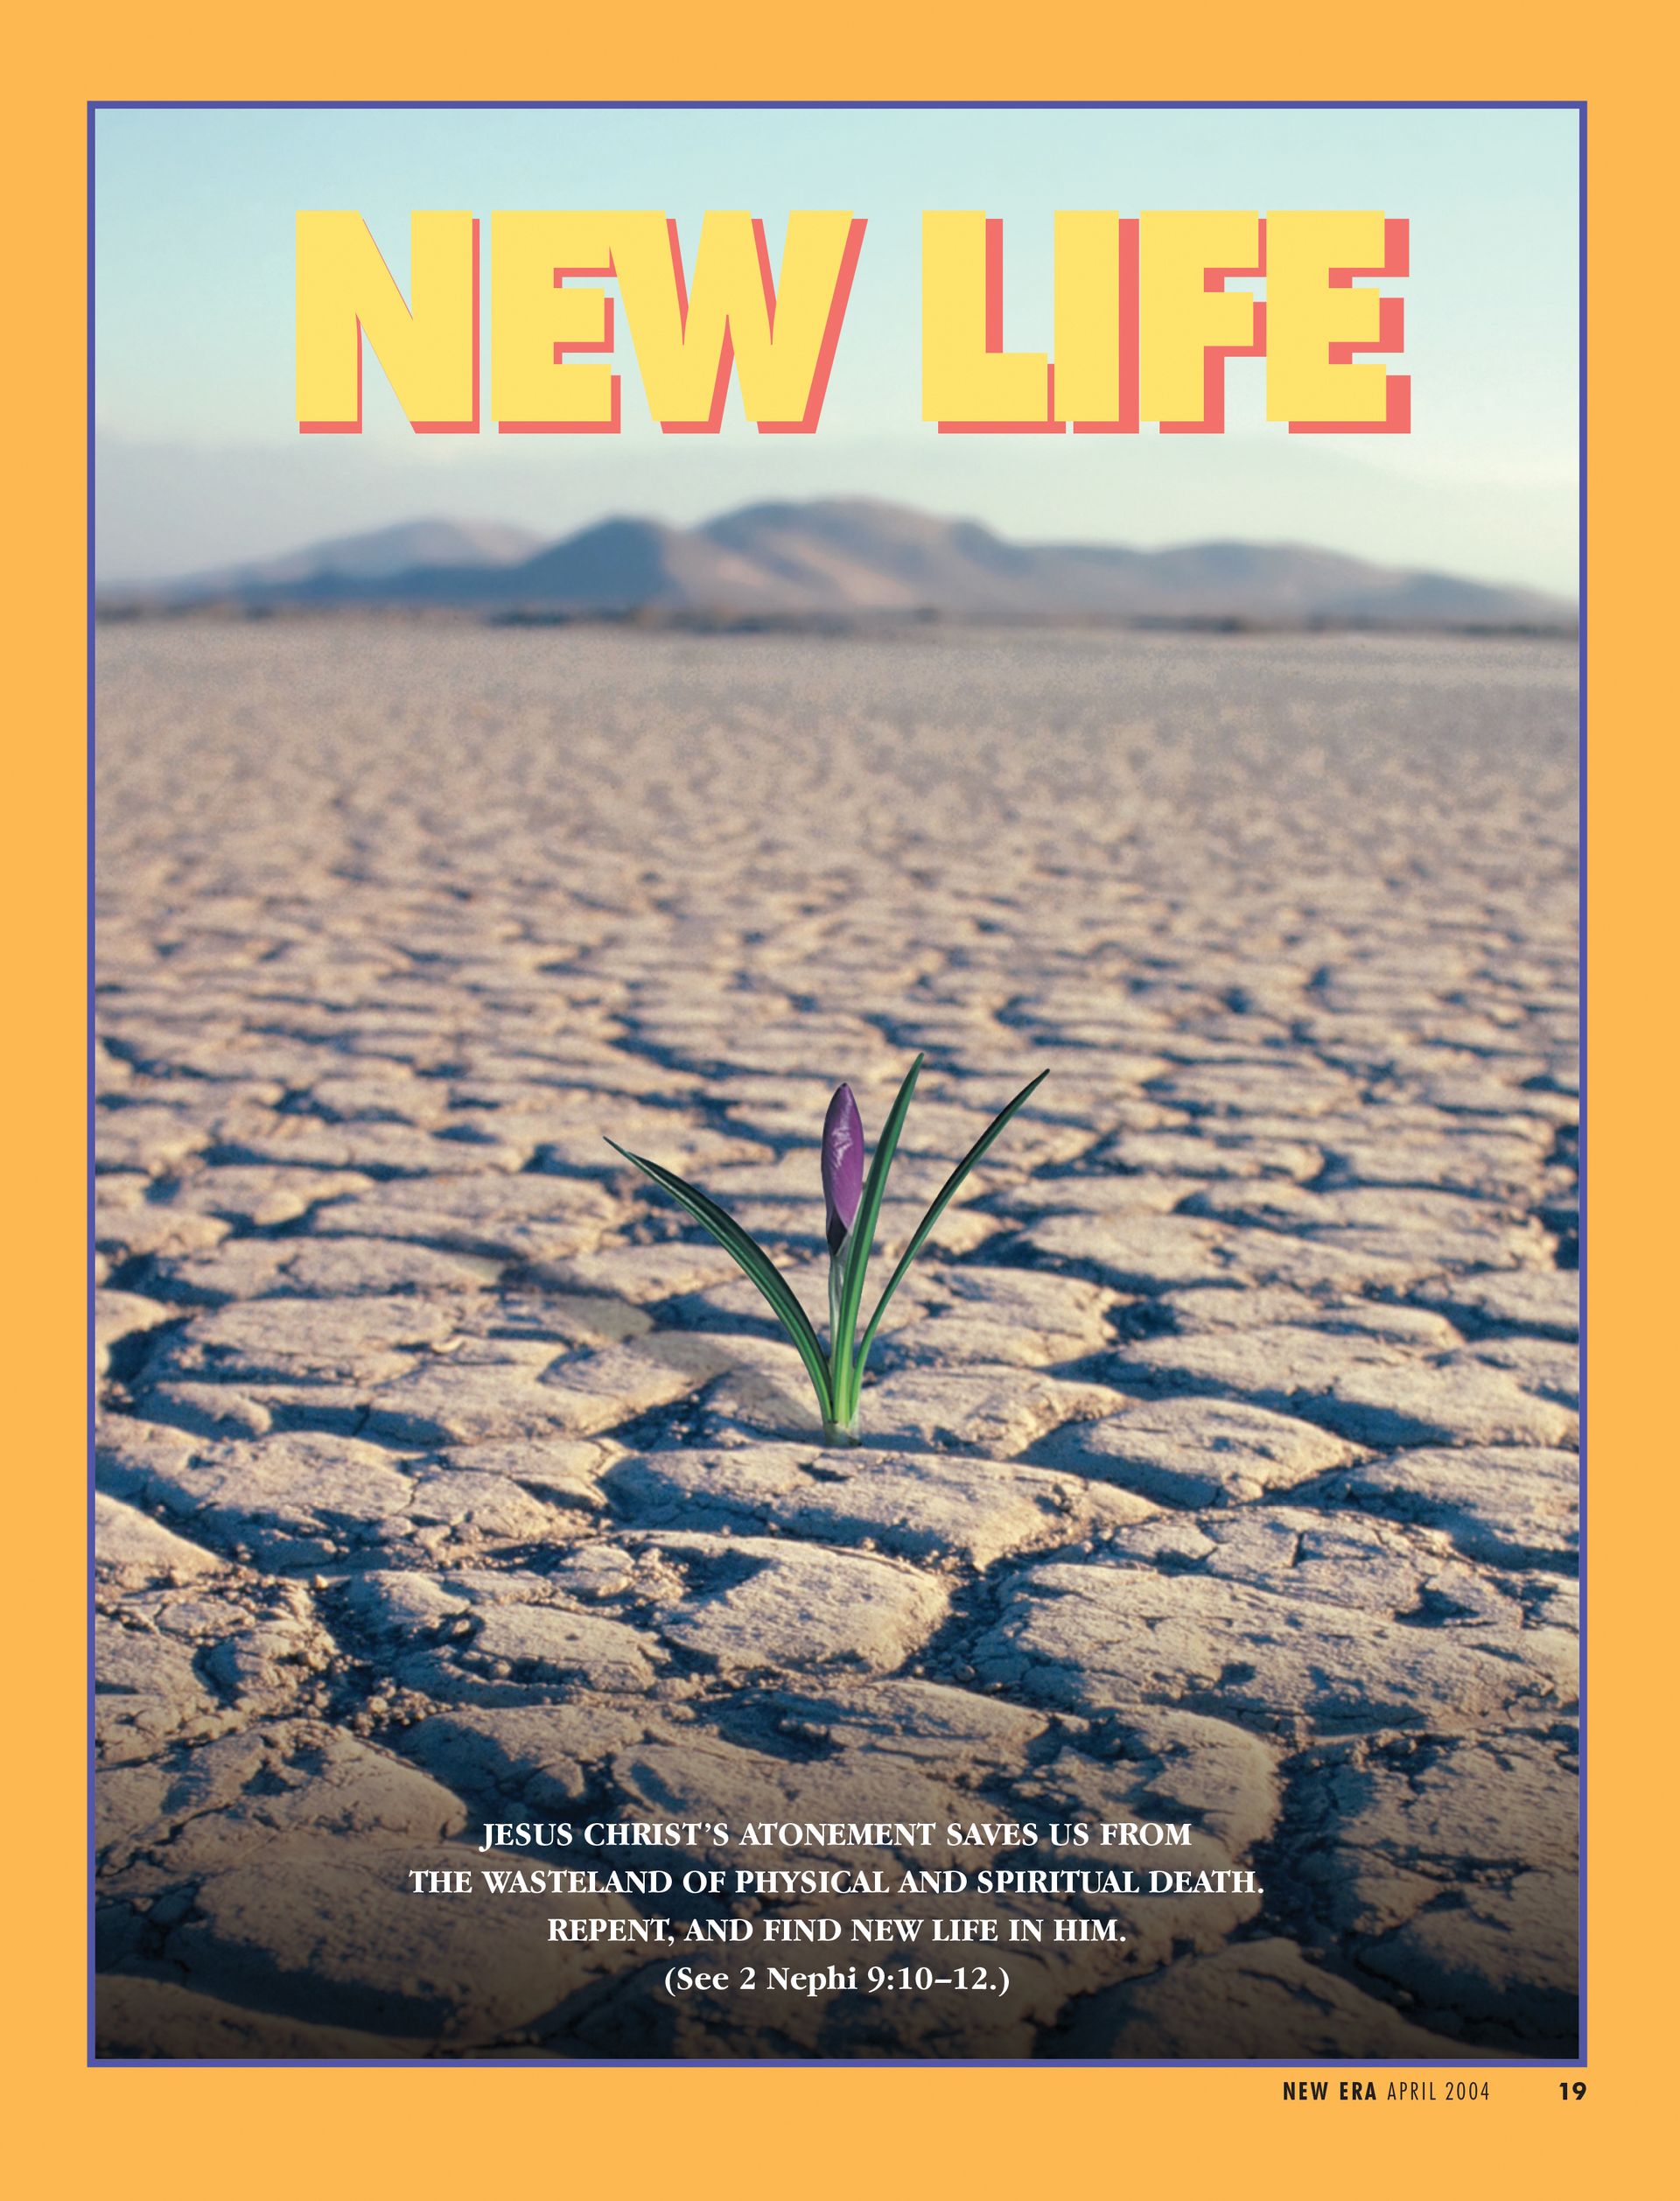 New Life. Jesus Christ’s Atonement saves us from the wasteland of physical and spiritual death. Repent, and find new life in Him. (See 2 Nephi 9:10–12.) Apr. 2004 © undefined ipCode 1.